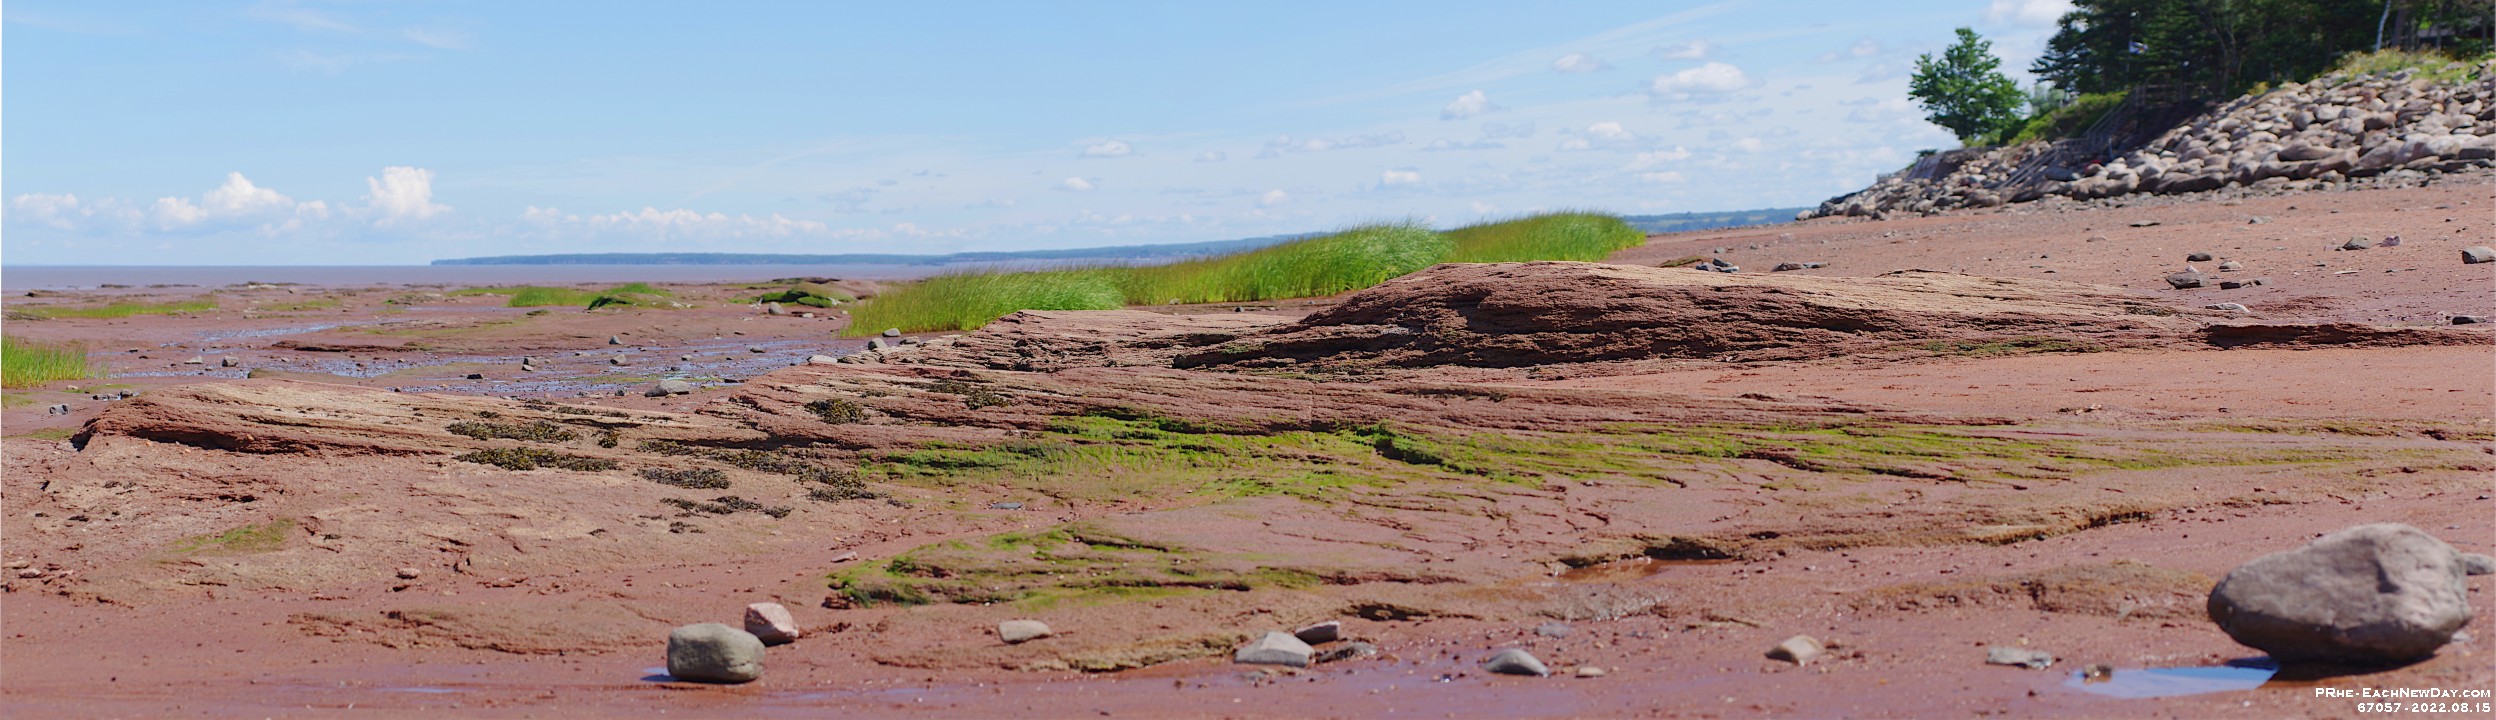 67057PaPeReCrLe - The mud flats at Evangeline Beach at low tide, Grand Pré, NS